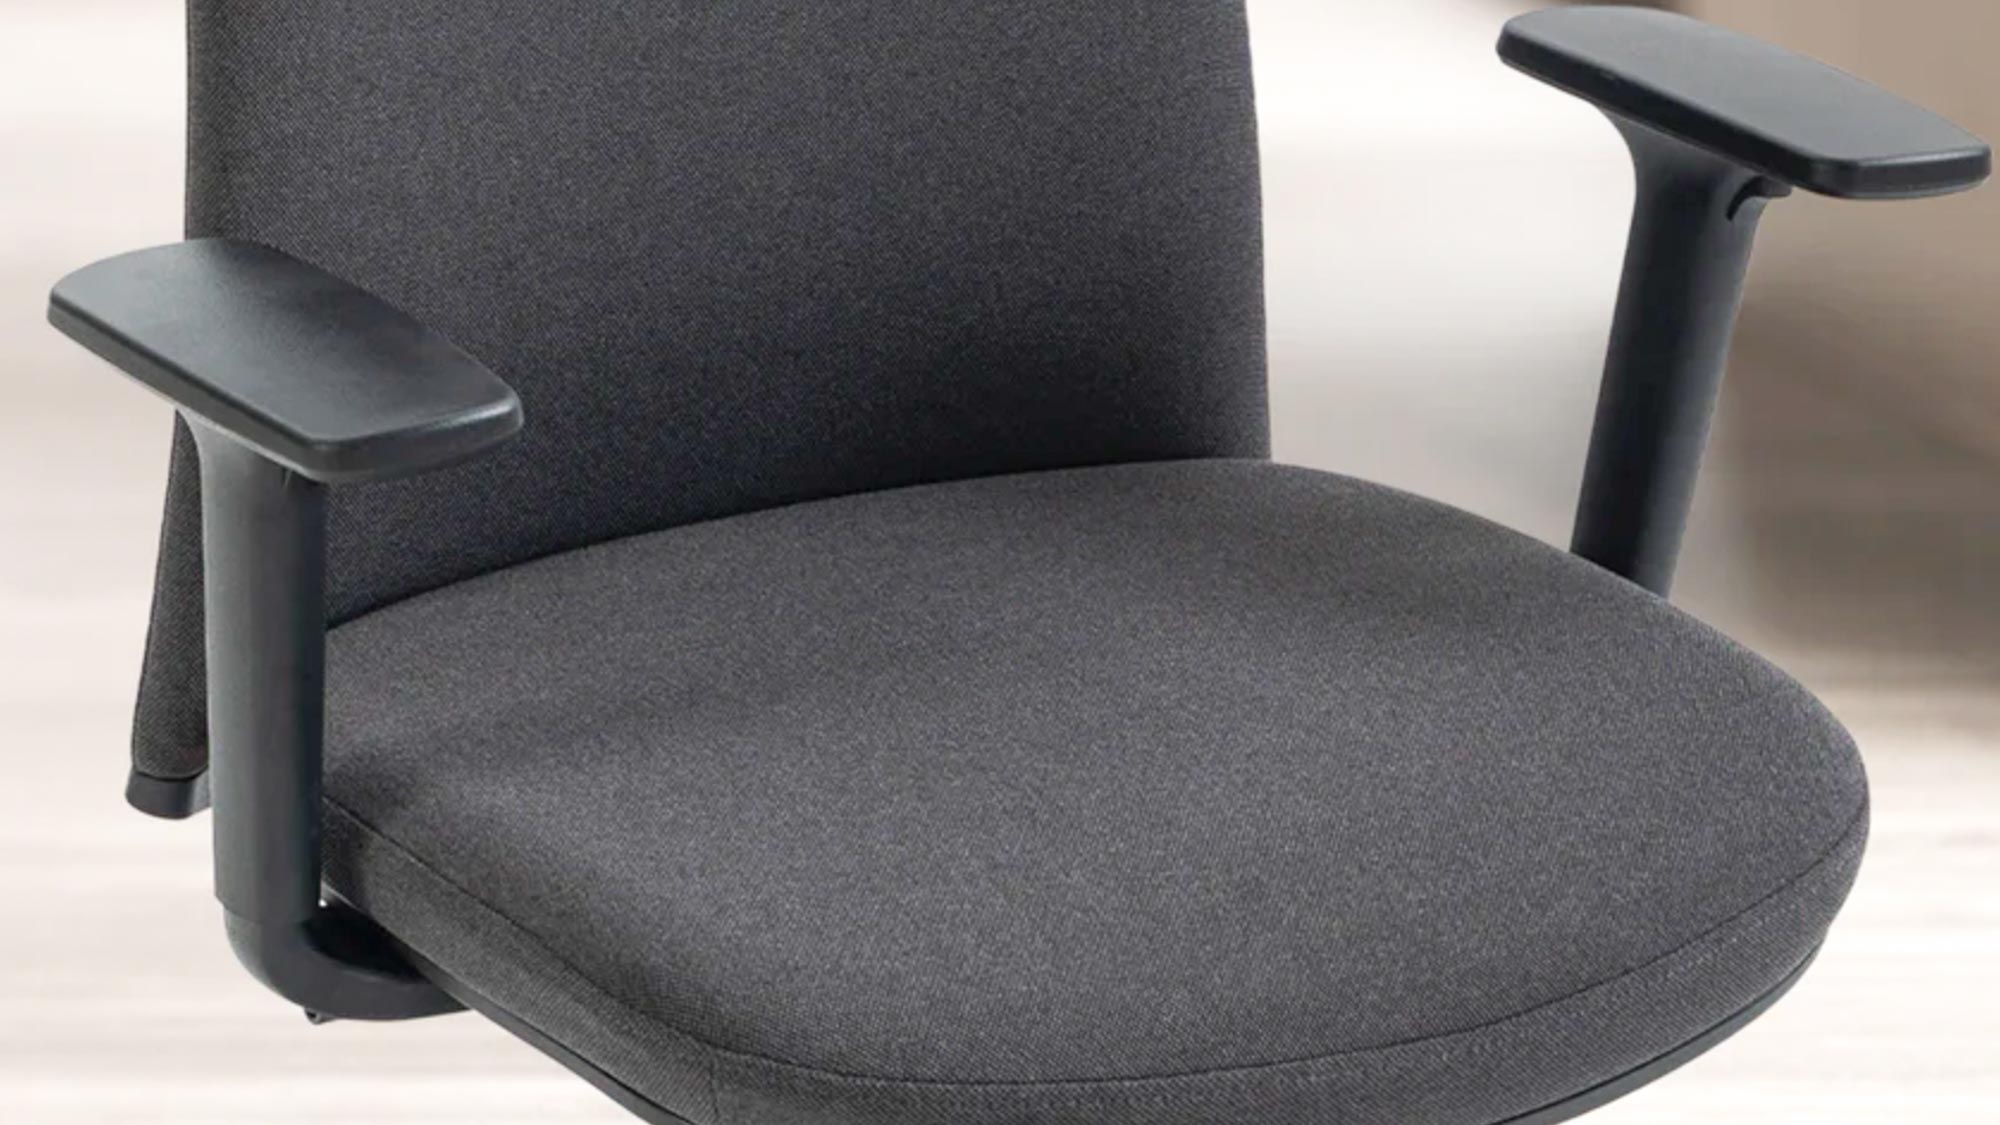 The armrests of the Boulies NUBI chair